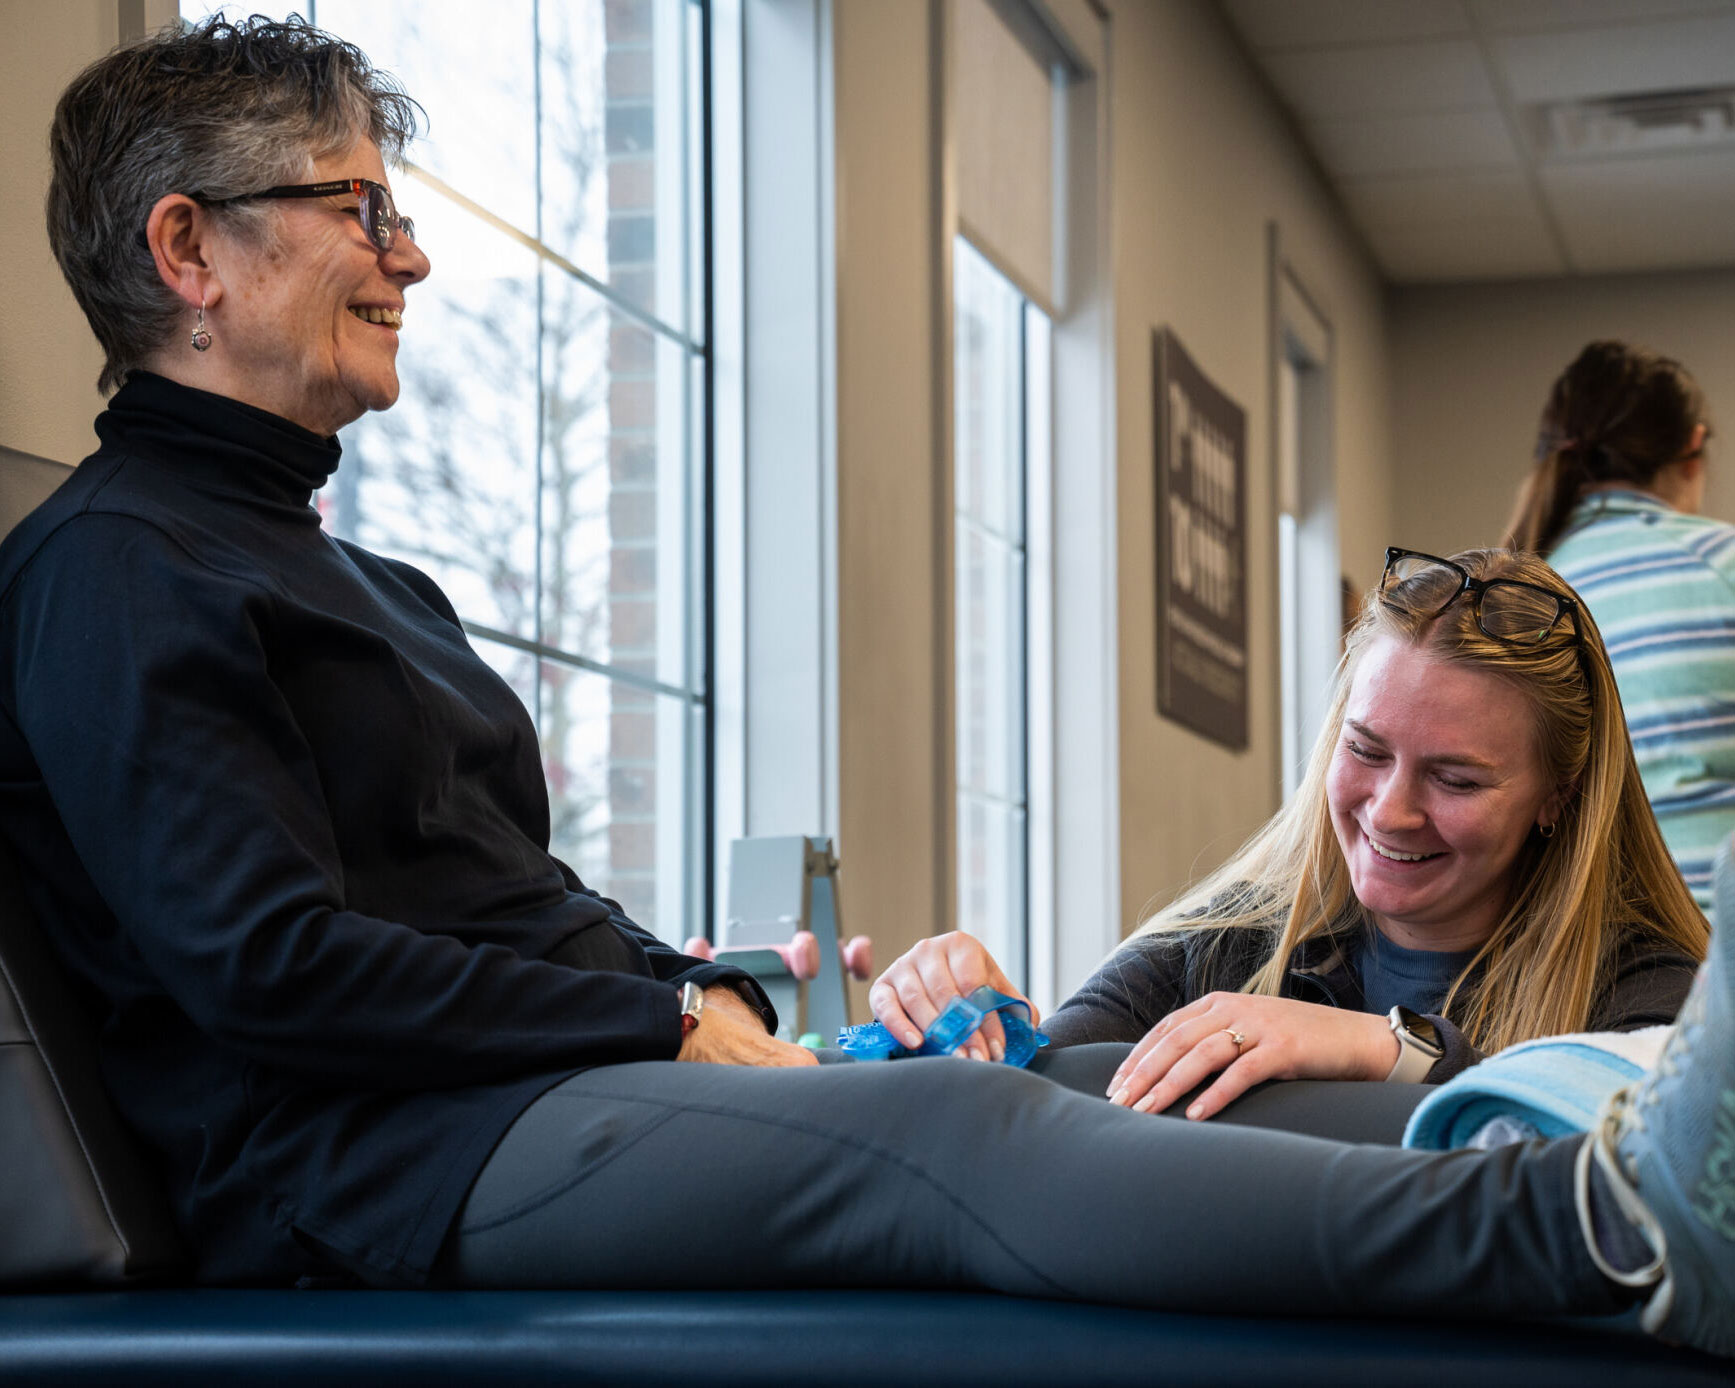 A Physical Therapist happily works on a knee patient.